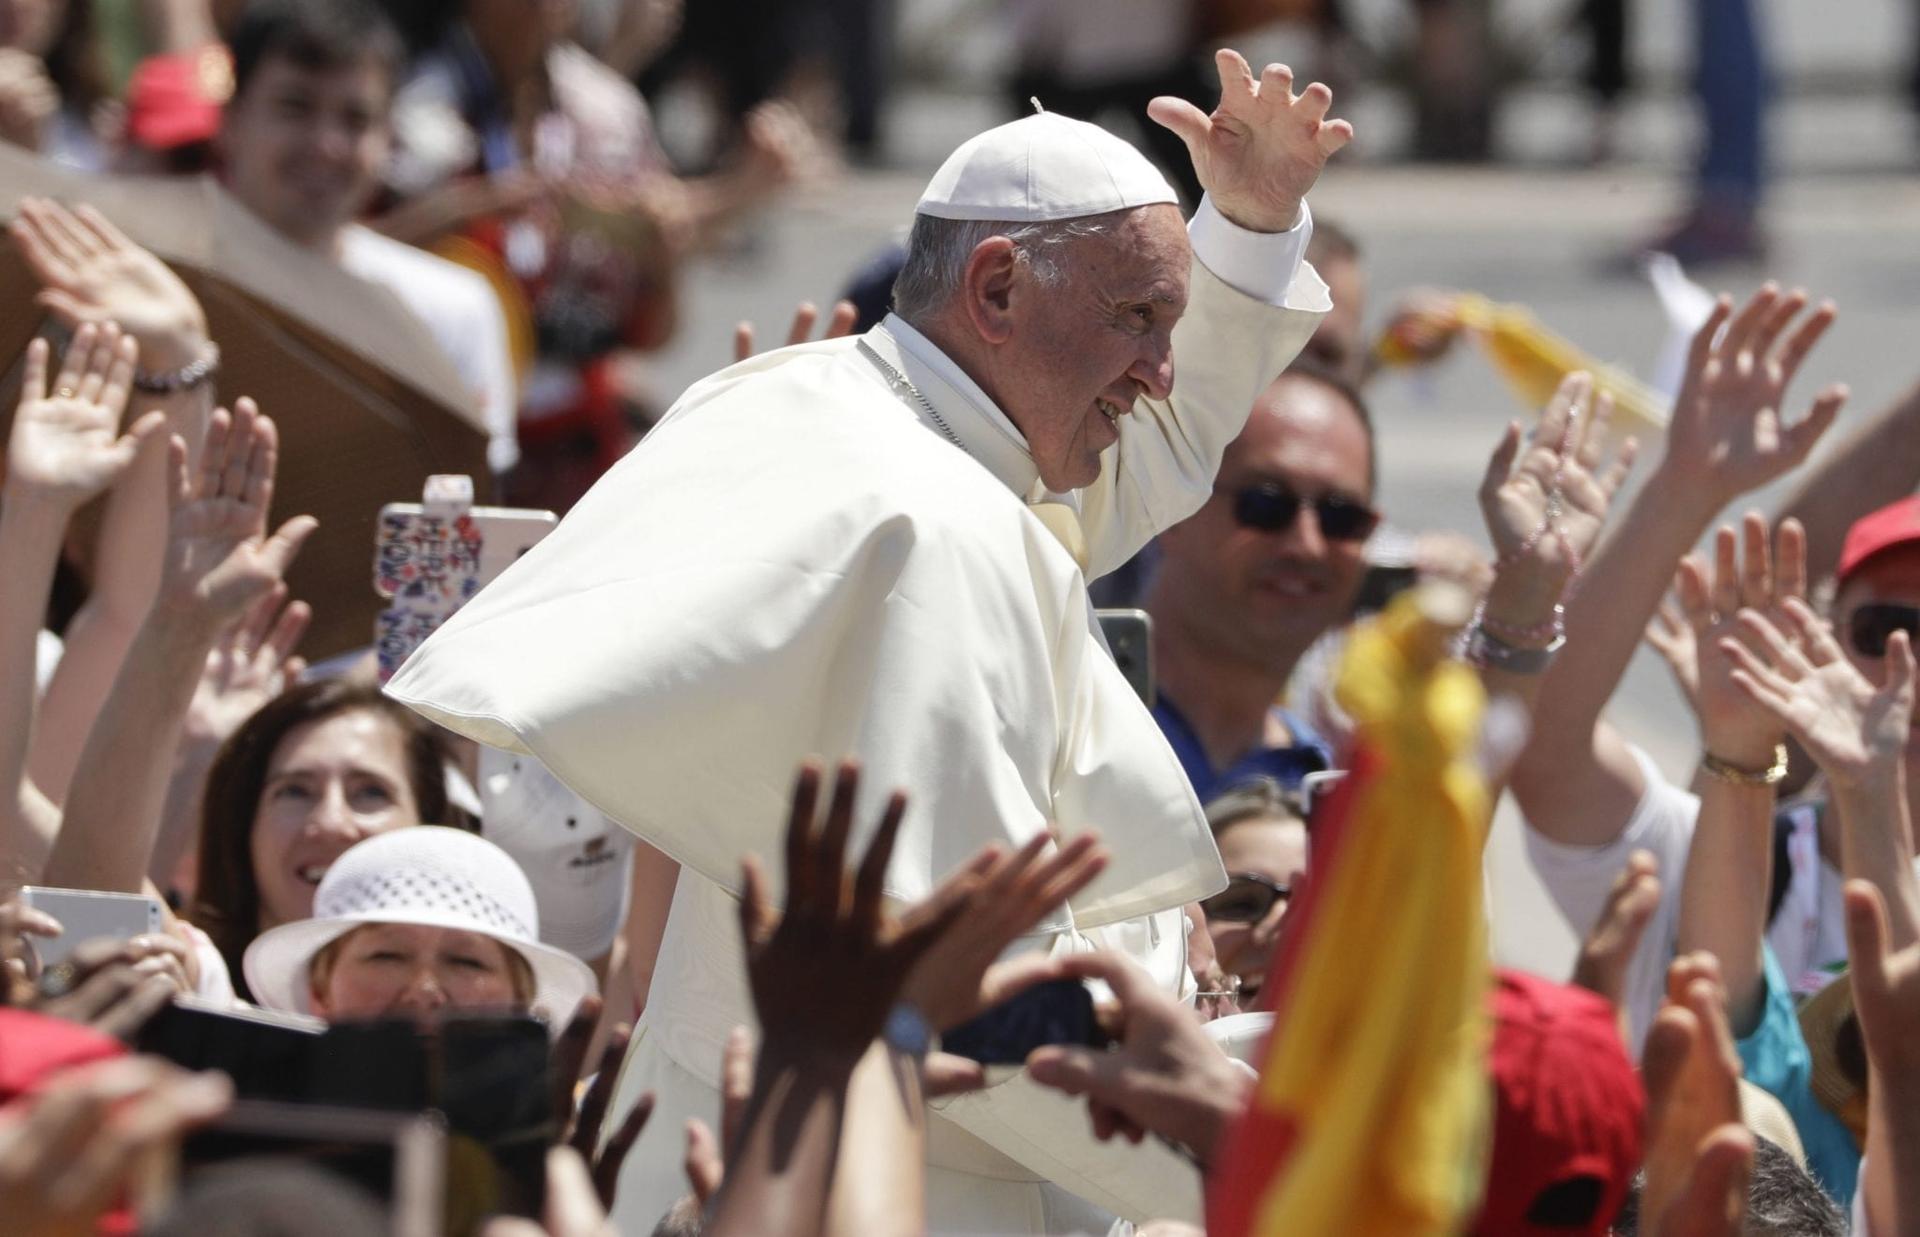 What will be Pope Francis’s ‘summer surprise’?